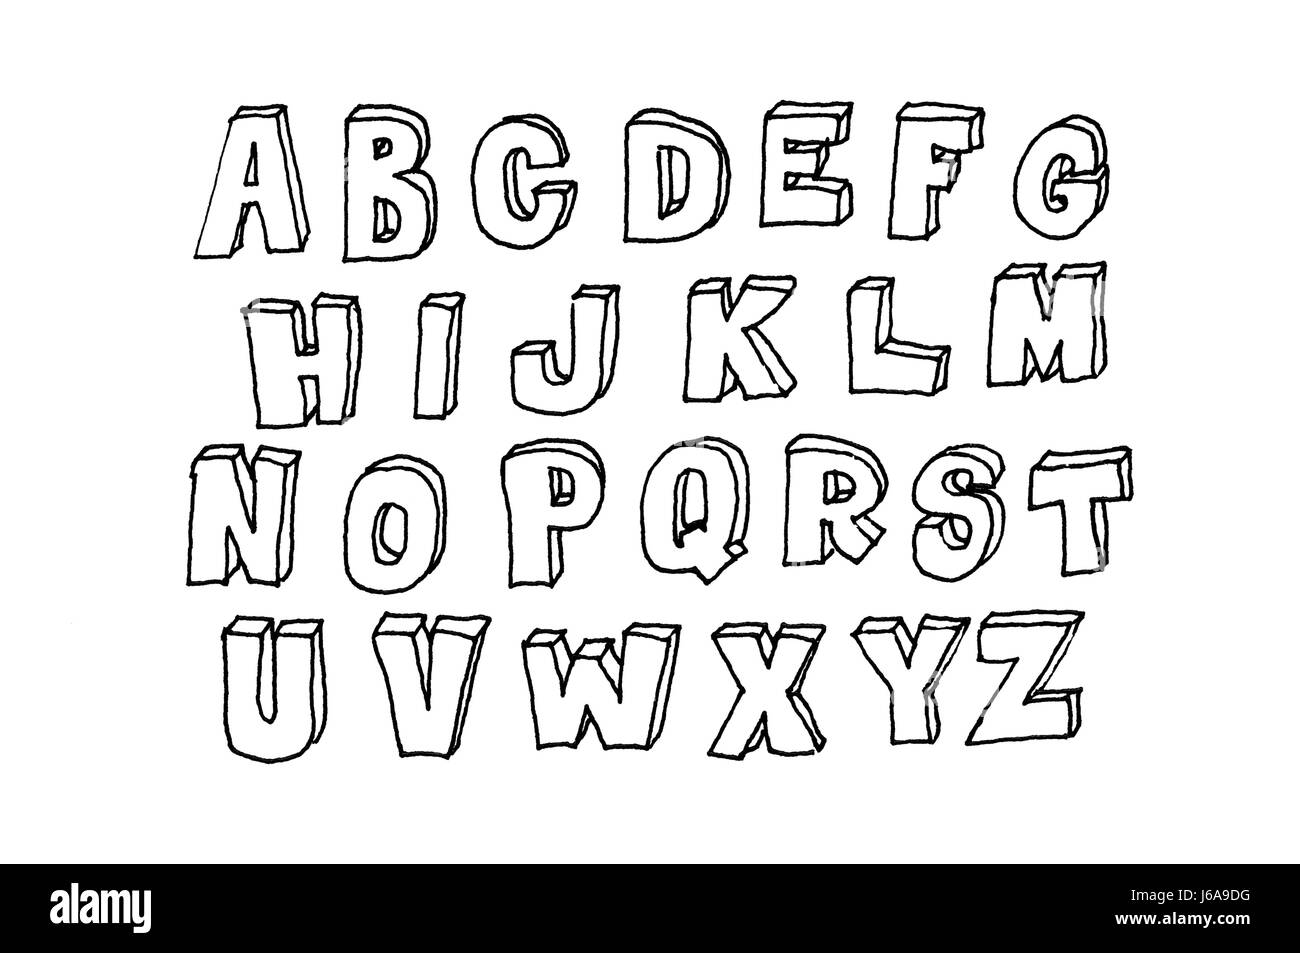 Hand drawn abc, doodle style. Black letters over white background, sketch illustration Stock Photo